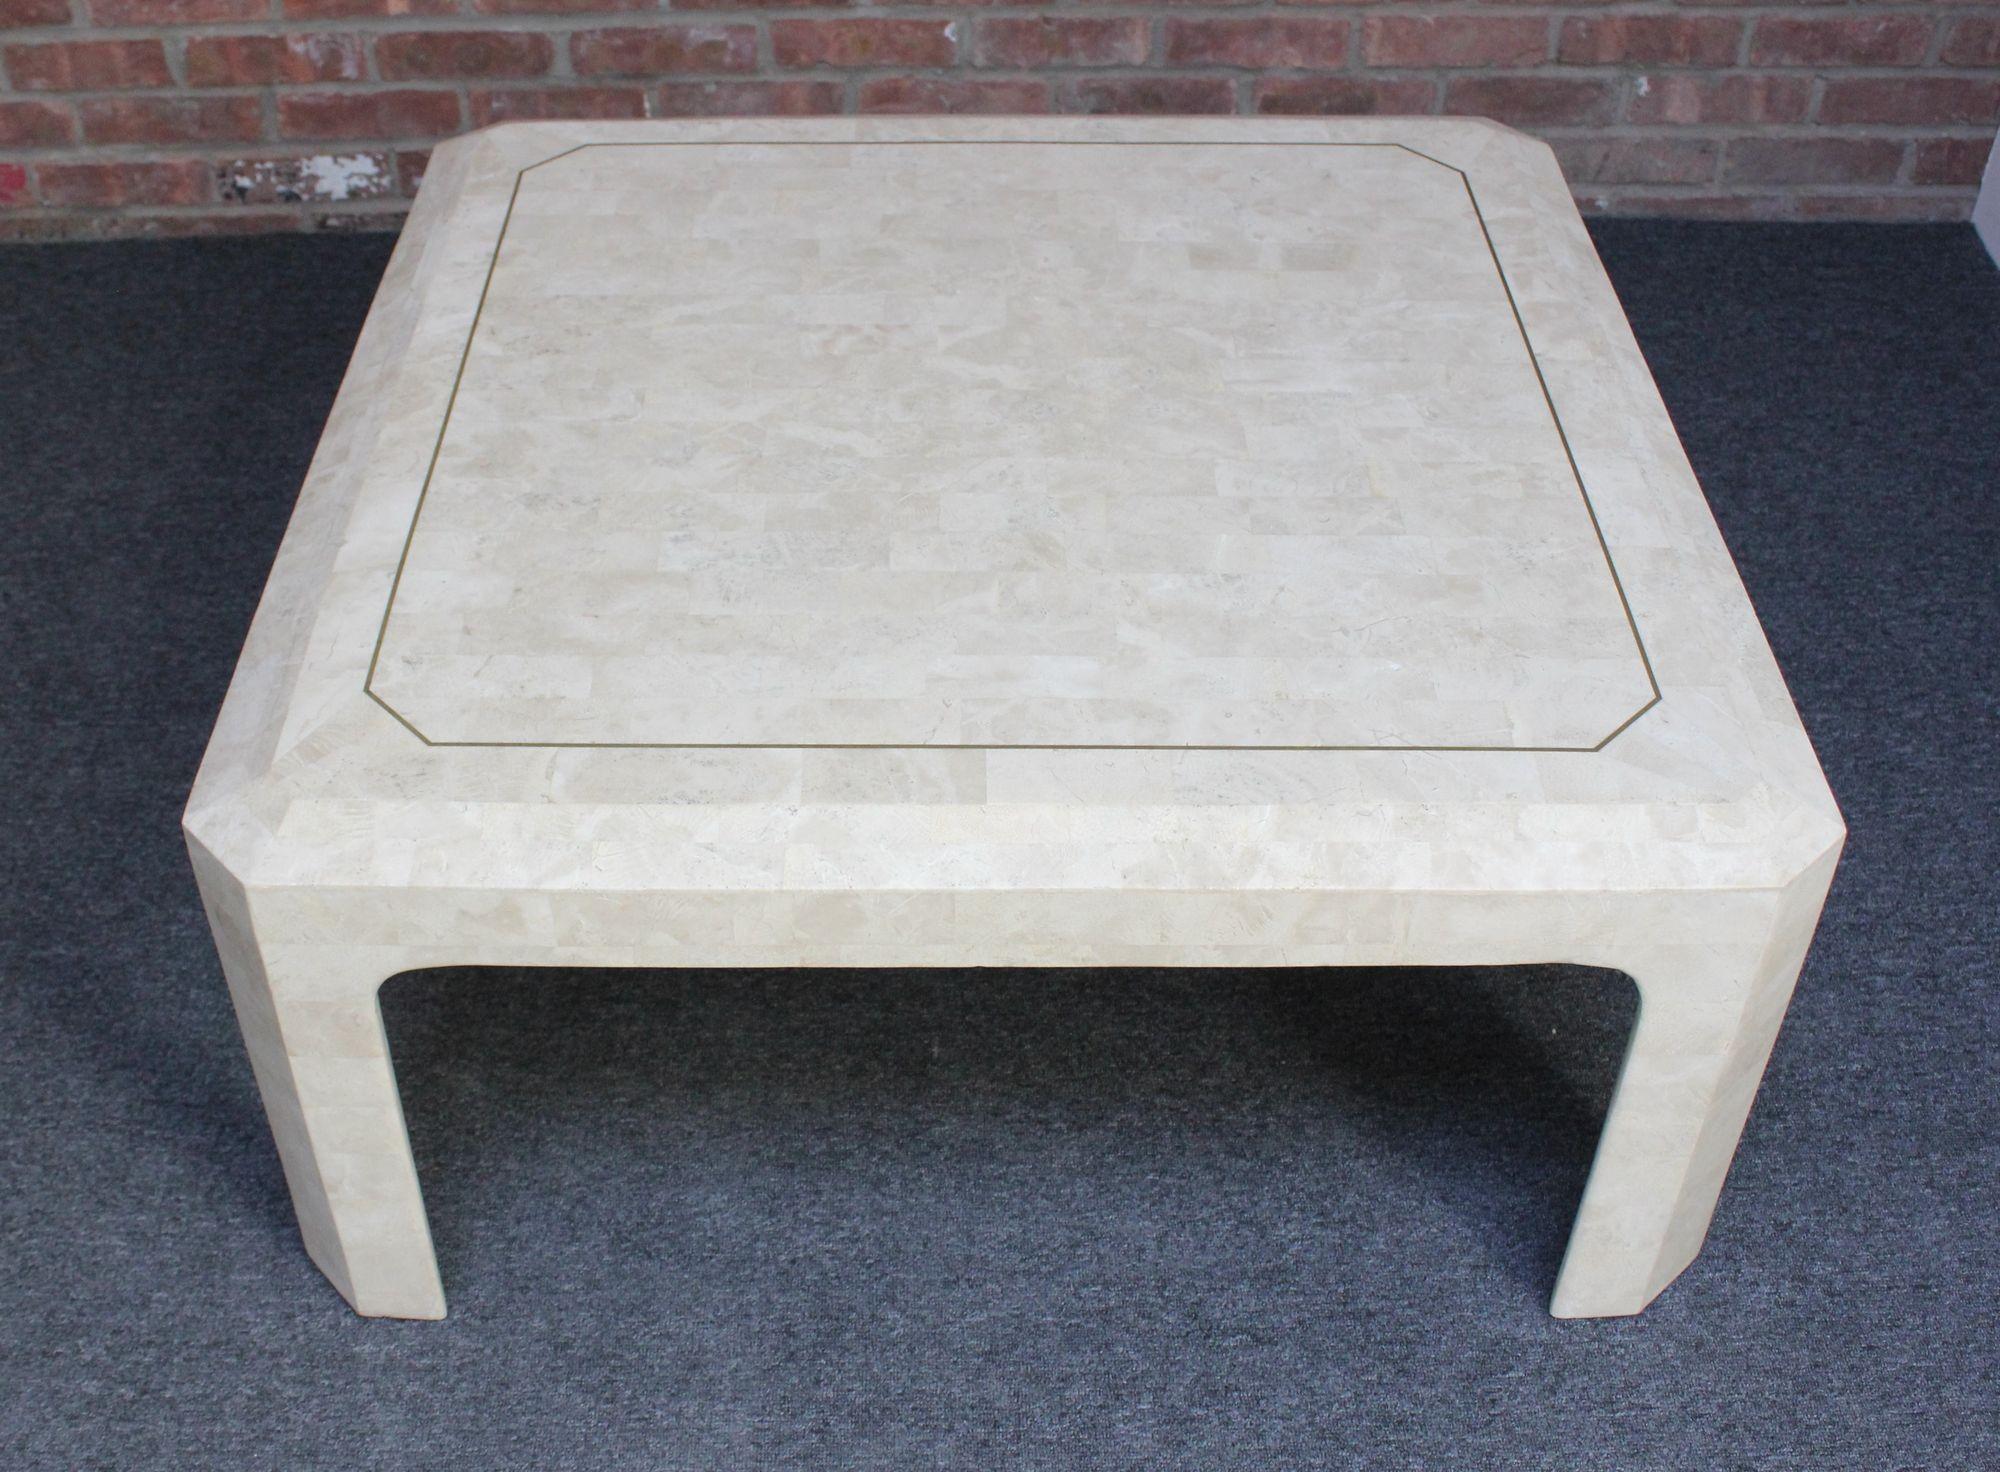 Attractive square coffee/cocktail table in beige tessellated fossil stone with brass inlay border and beveled edge by Maitland-Smith (ca. 1970s, Philippines).
Very good, vintage condition with scratches/light wear naturally occurring in the stone